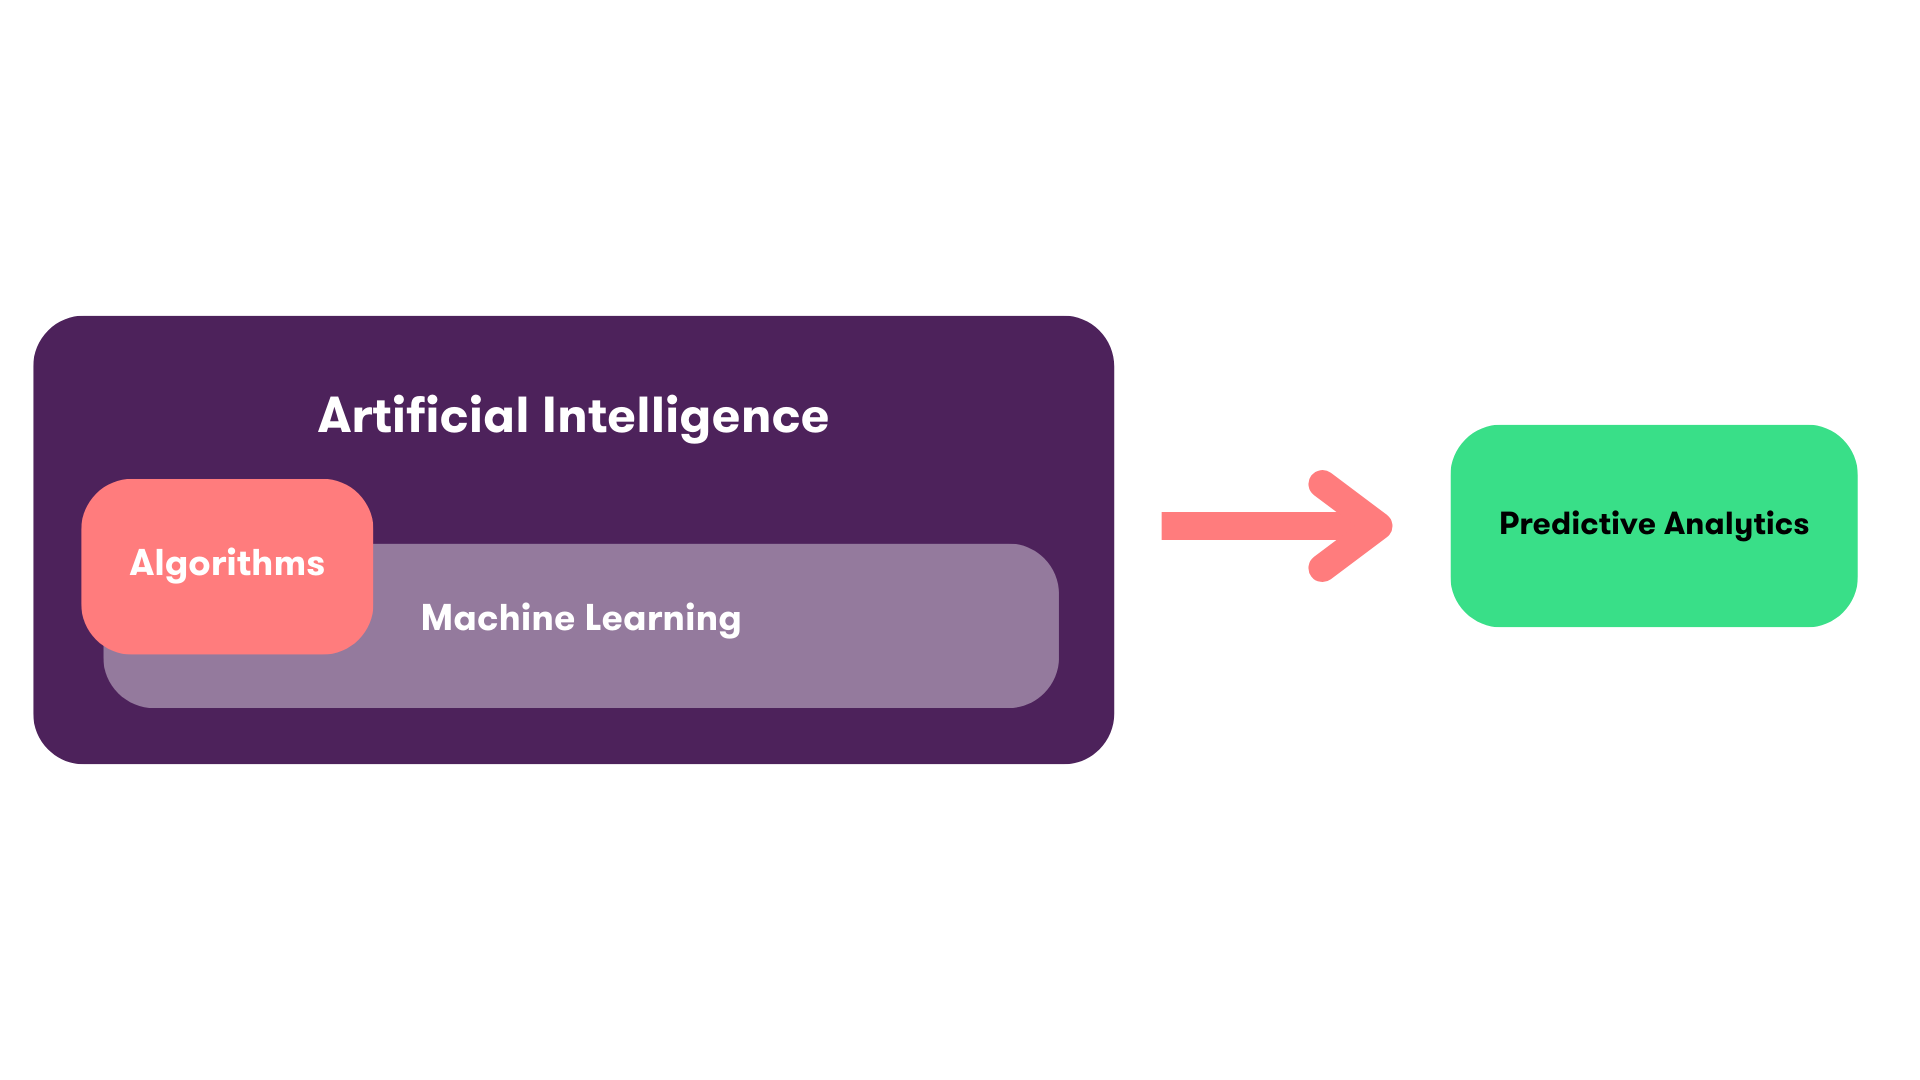 The image shows the categorisation of AI, ML, algorithms and predictive analytics